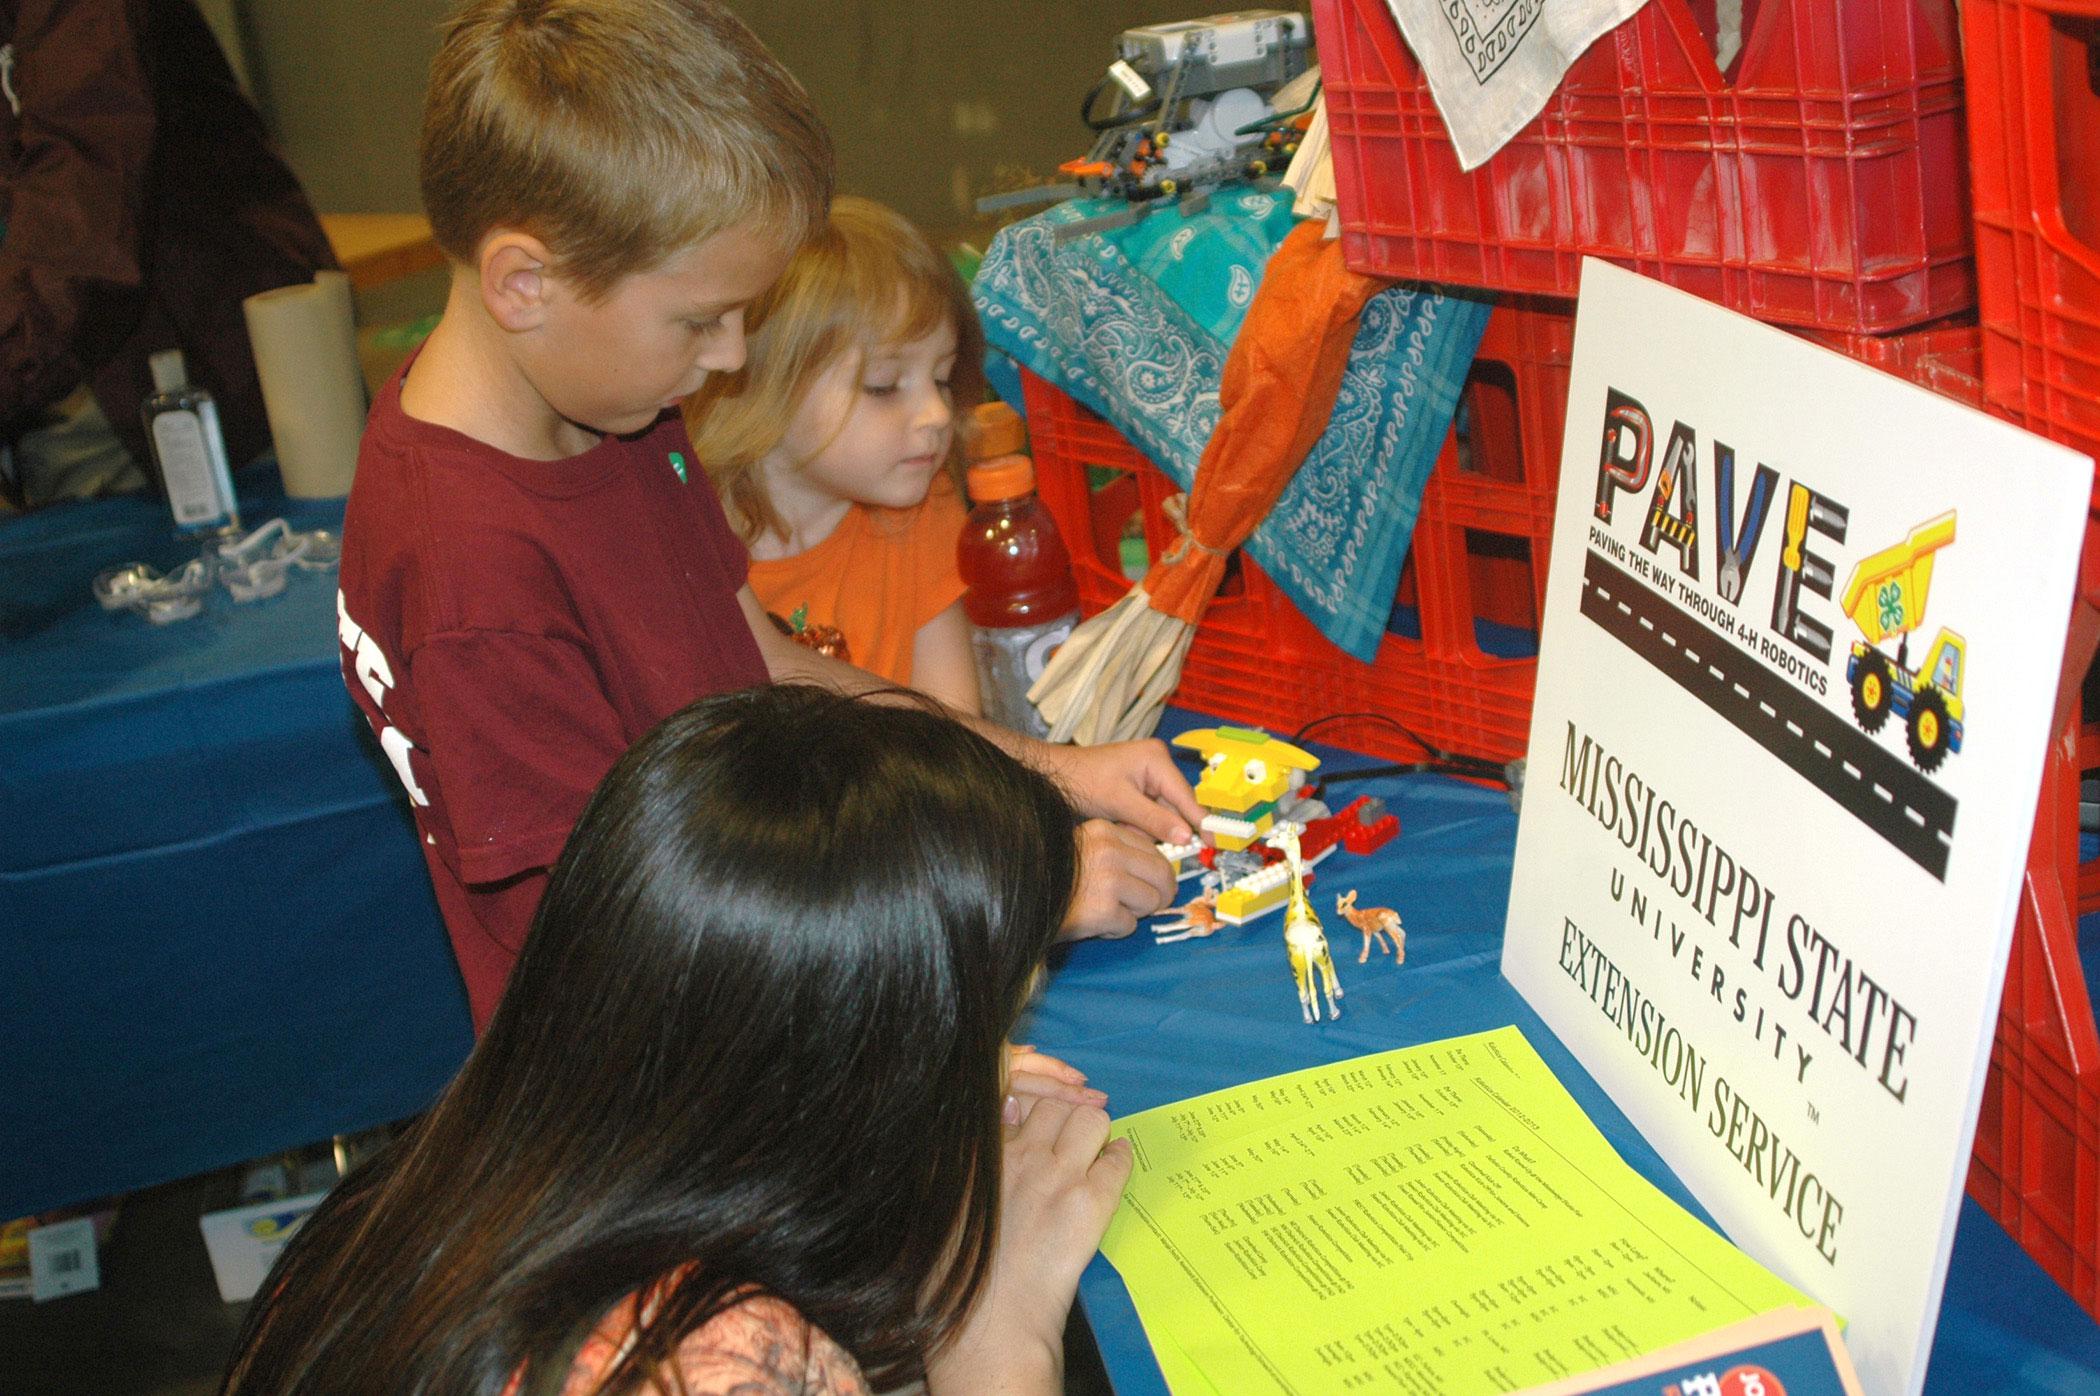 Monica Morel, Hancock County robotics club volunteer leader, helps Luke and Rebekah Schilling of Oktibbeha County with a robot during 4-H Day at the Mississippi State Fair in Jackson on Oct. 13. The robotics exhibit was one of several hands-on science activities available to visitors. (Photo by MSU Ag Communications/Susan Collins-Smith)